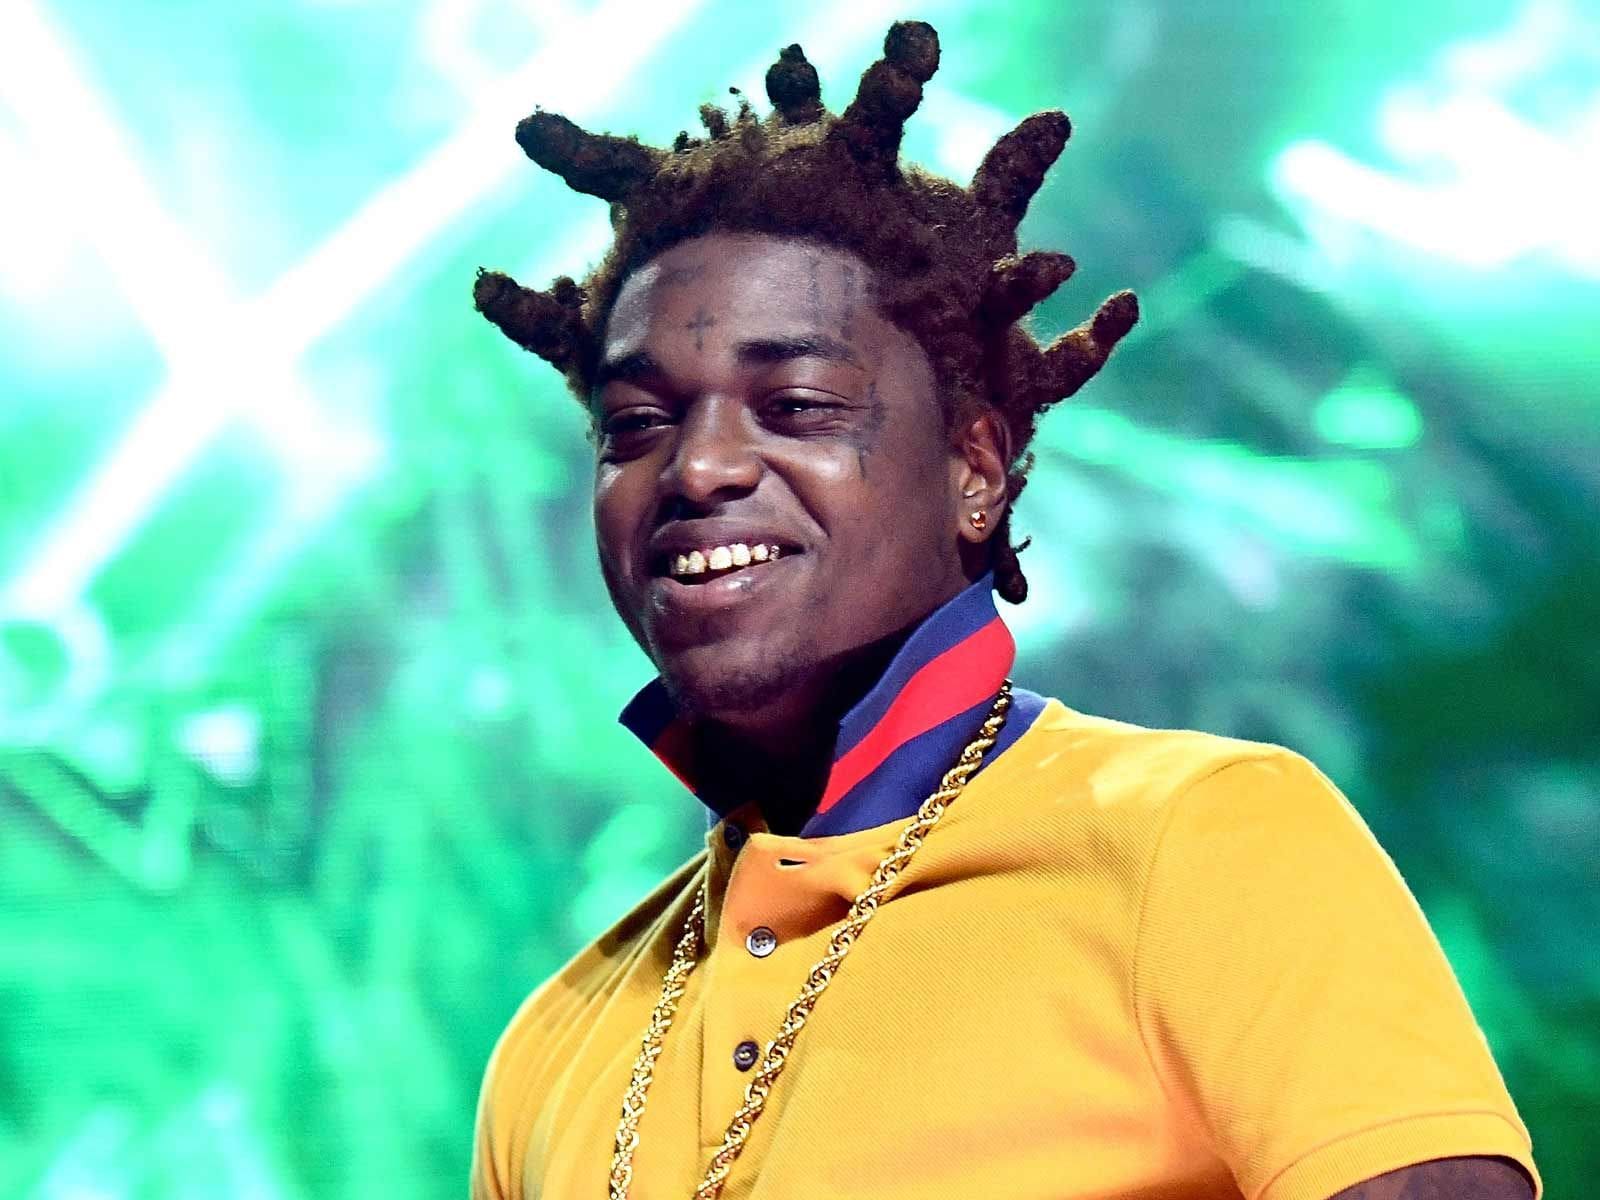 Kodak Black Was Transferred To A New Prison After He Accused His Former Prison Of Torture